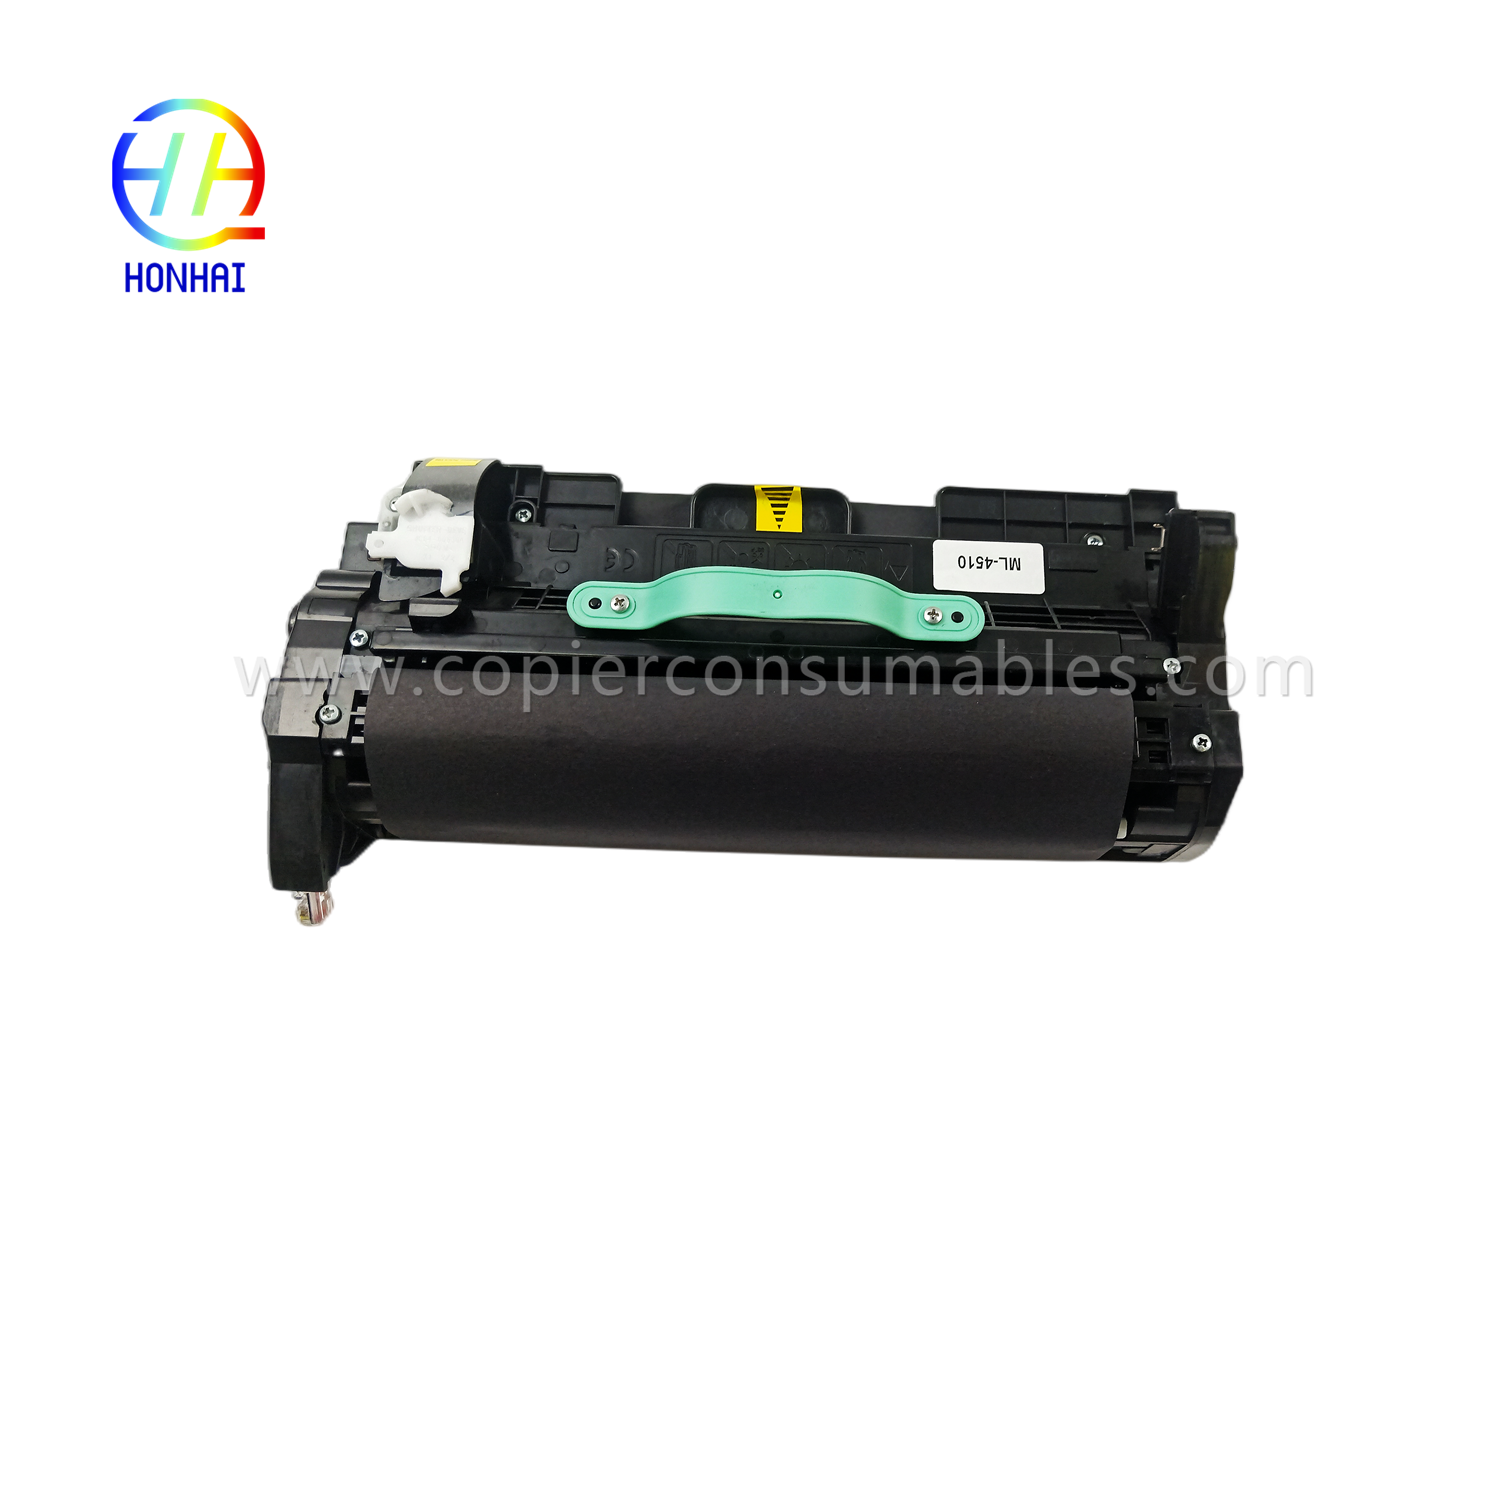 https://www.copierconsumables.com/fuser-unit-for-samsung-ml4510-ml4512-ml-4510nd-ml-4512nd-ml-4510-ml-4512-jc91-01028a-fusing-assembly-2-product/